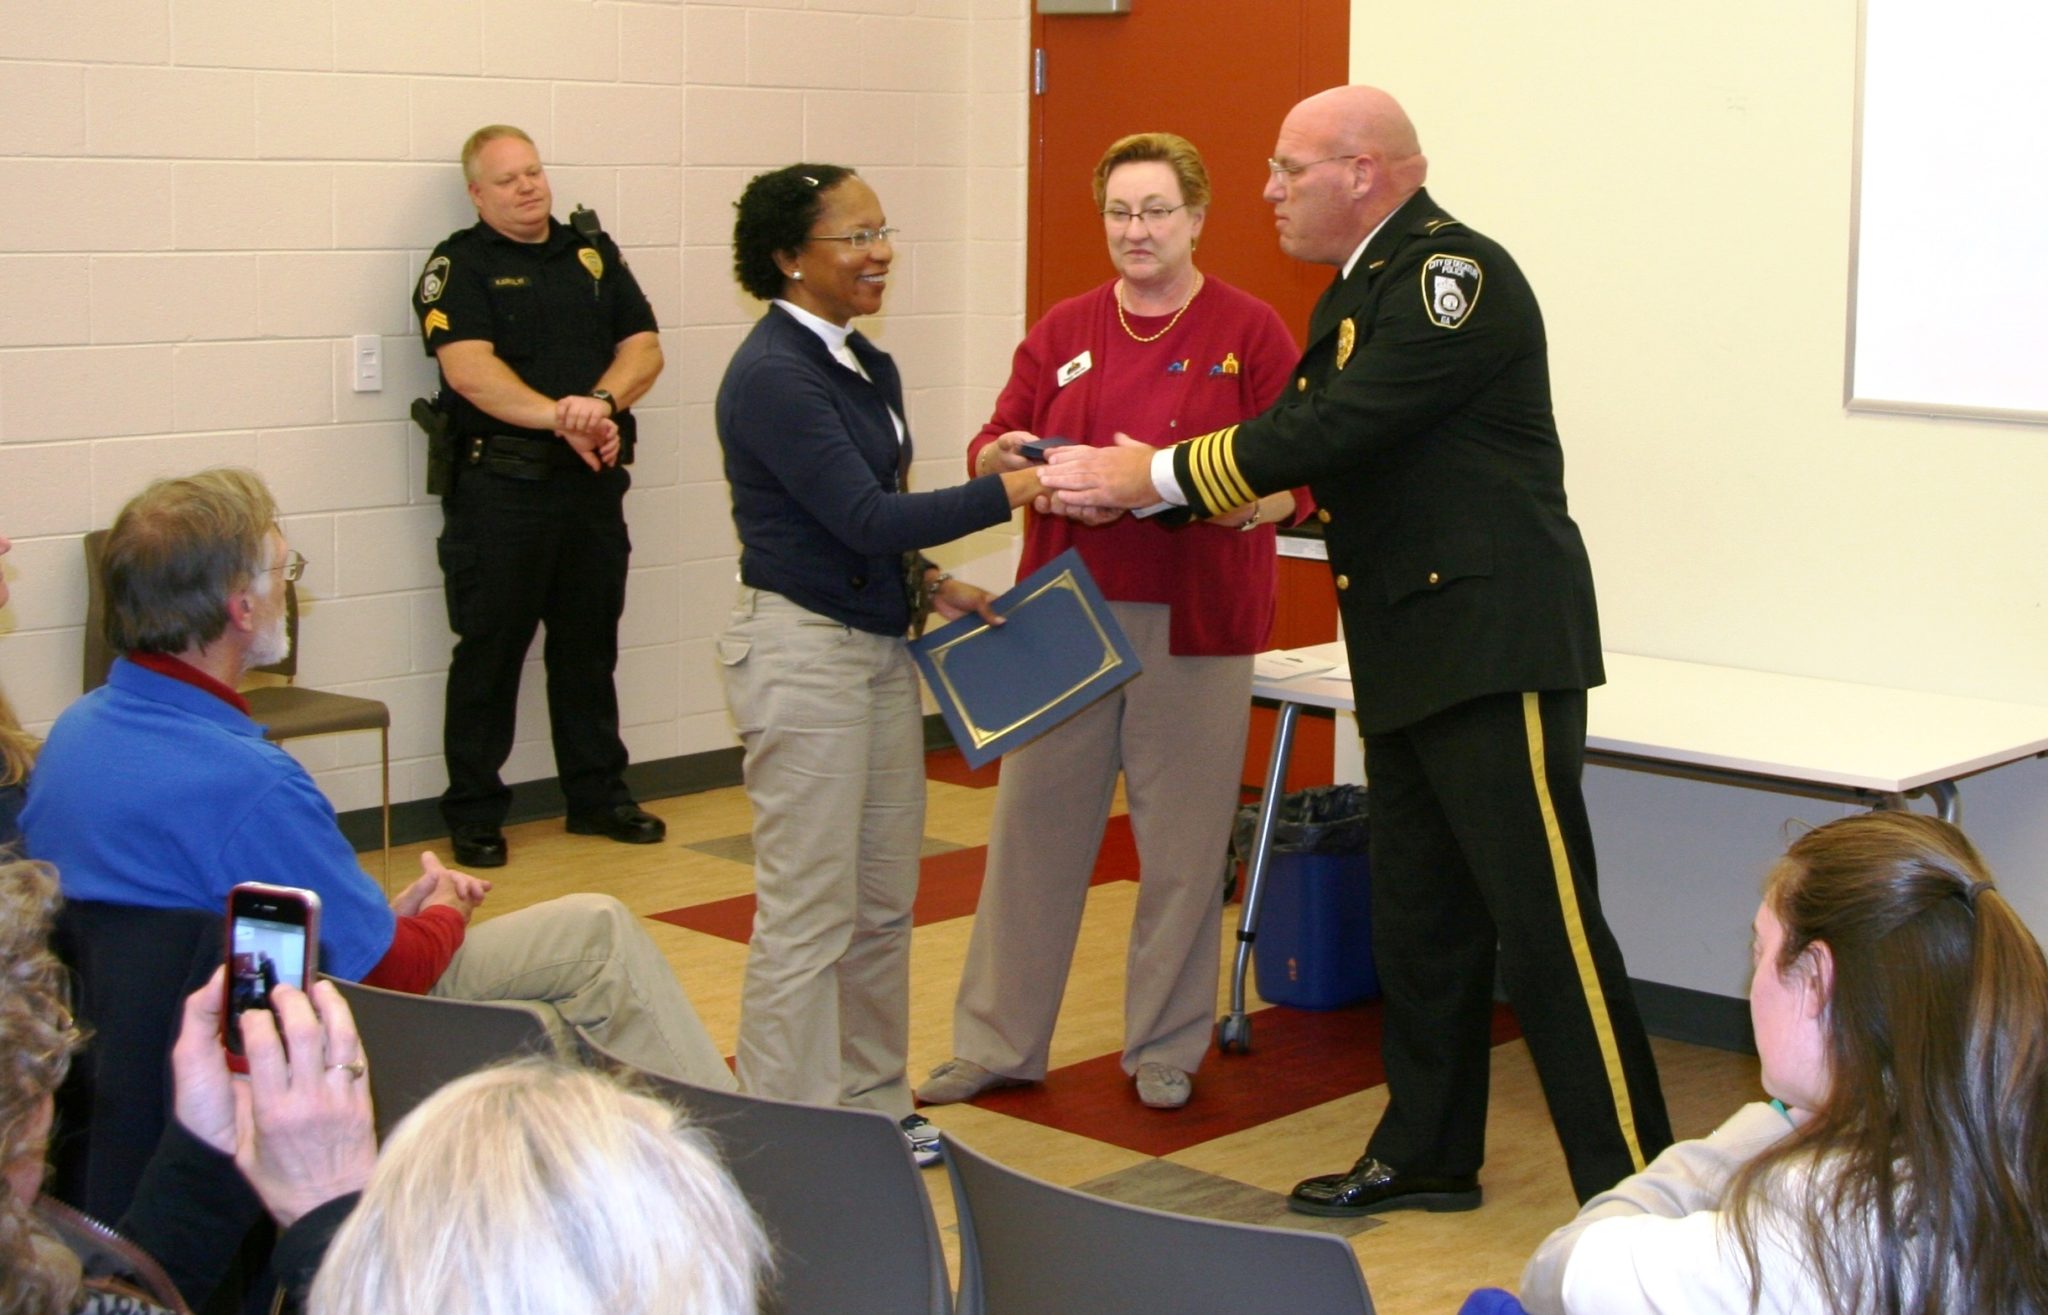 Police Chief Mike Booker, congratulating a Decatur Citizens Police Academy graduate. Photo courtesy of the Decatur Police Department.